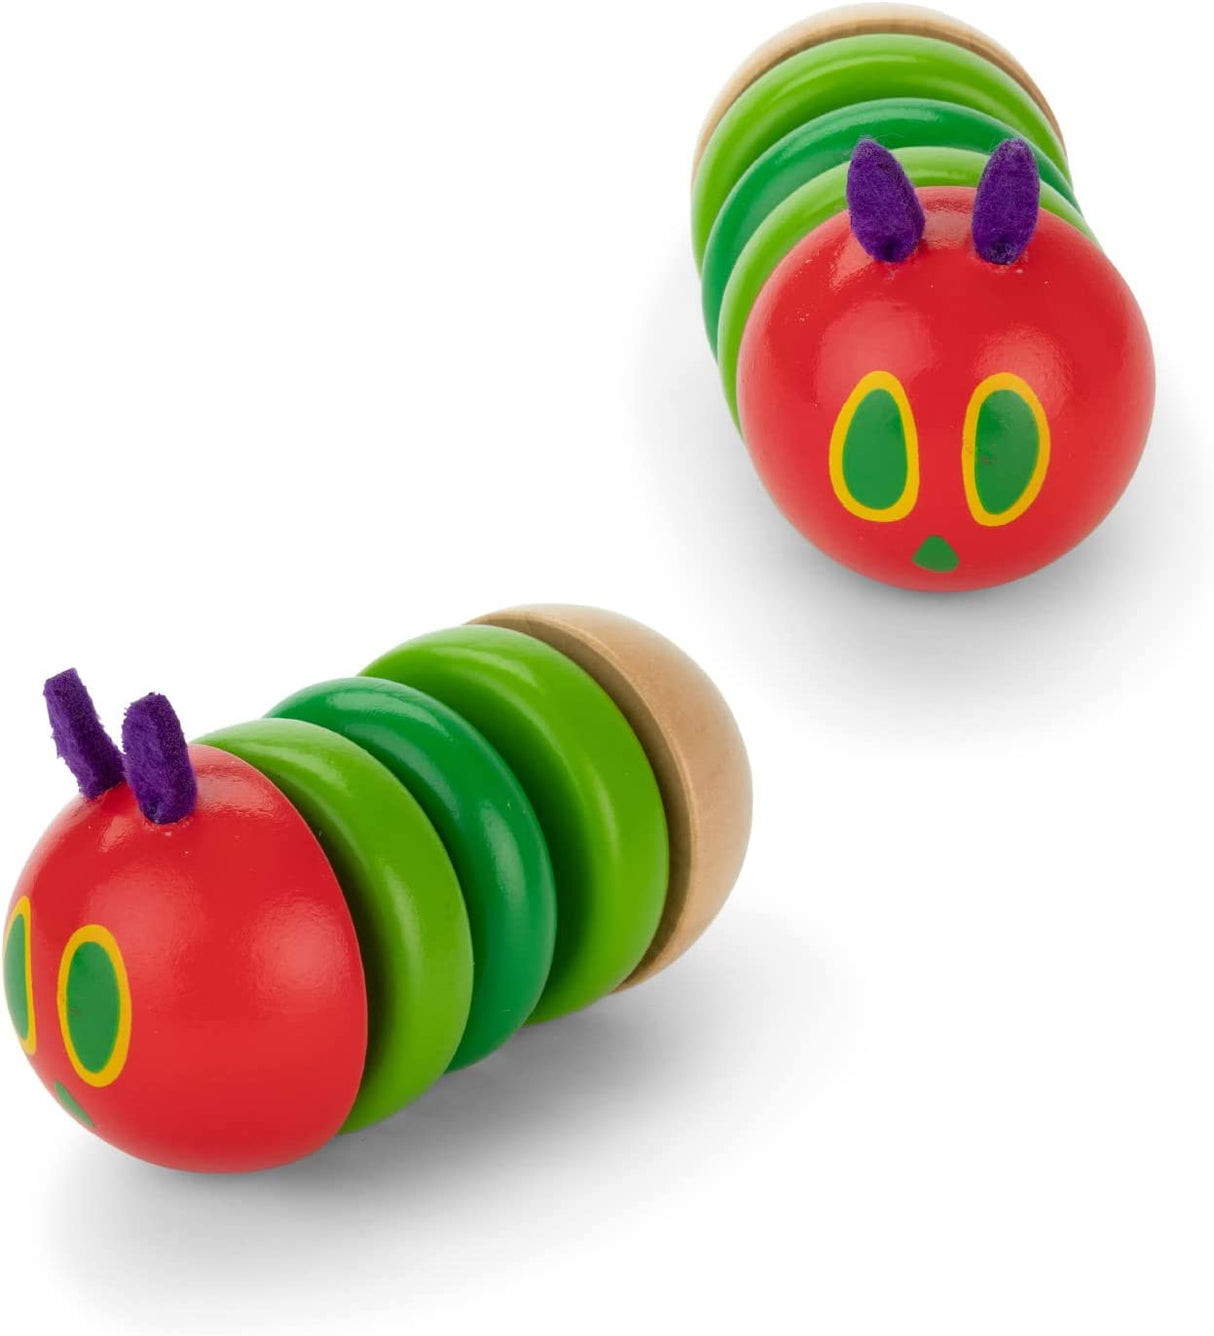 Eric Carle | The Very Hungry Caterpillar Wood Fidget Toy